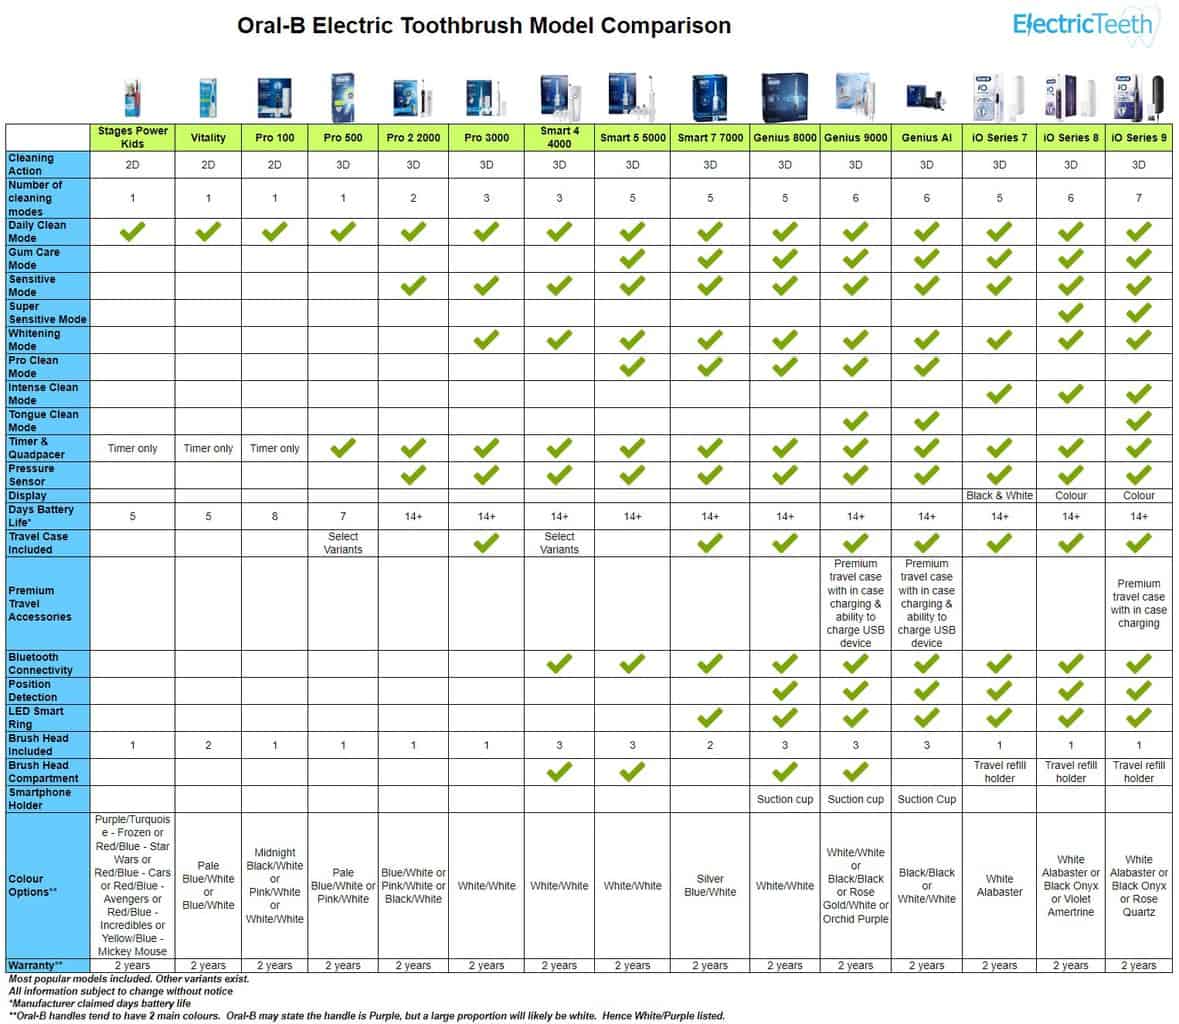 Oral-B Electric Toothbrush Comparisons 1